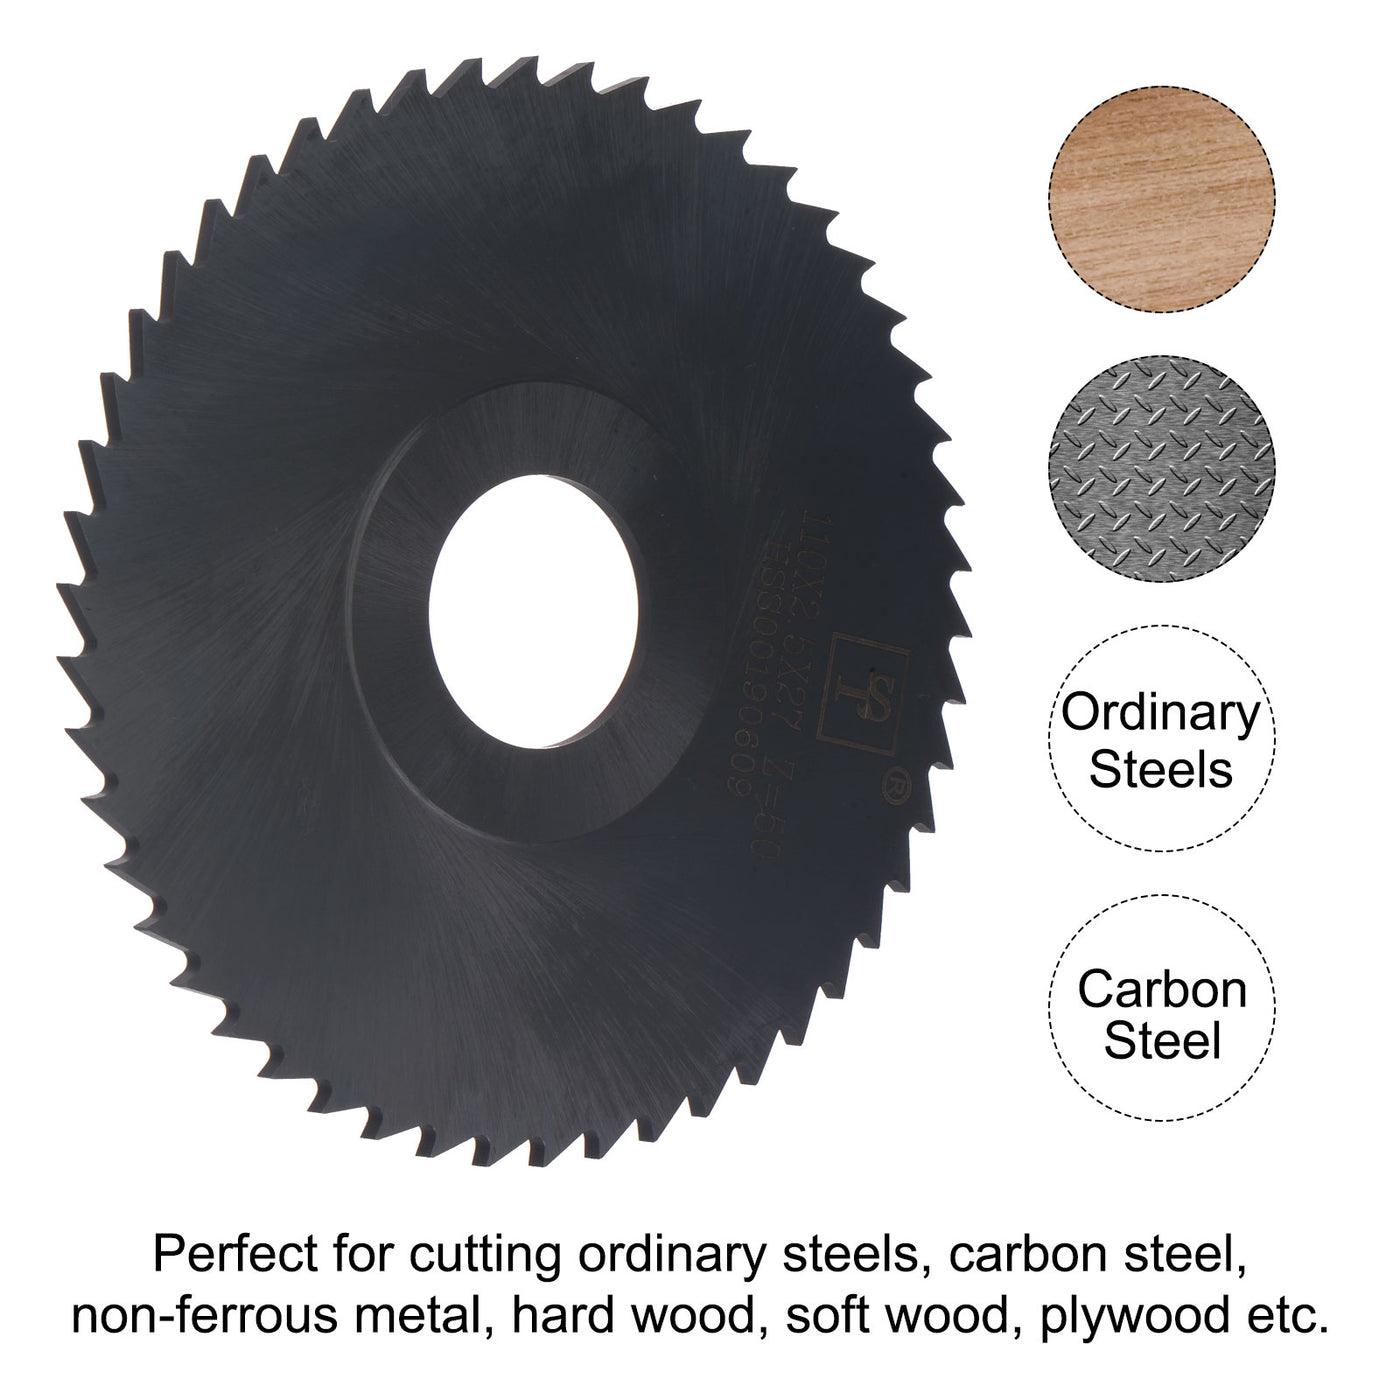 Uxcell Uxcell 100mm Dia 27mm Arbor 3mm Thick 50 Tooth Nitriding Circular Saw Blade Cutter